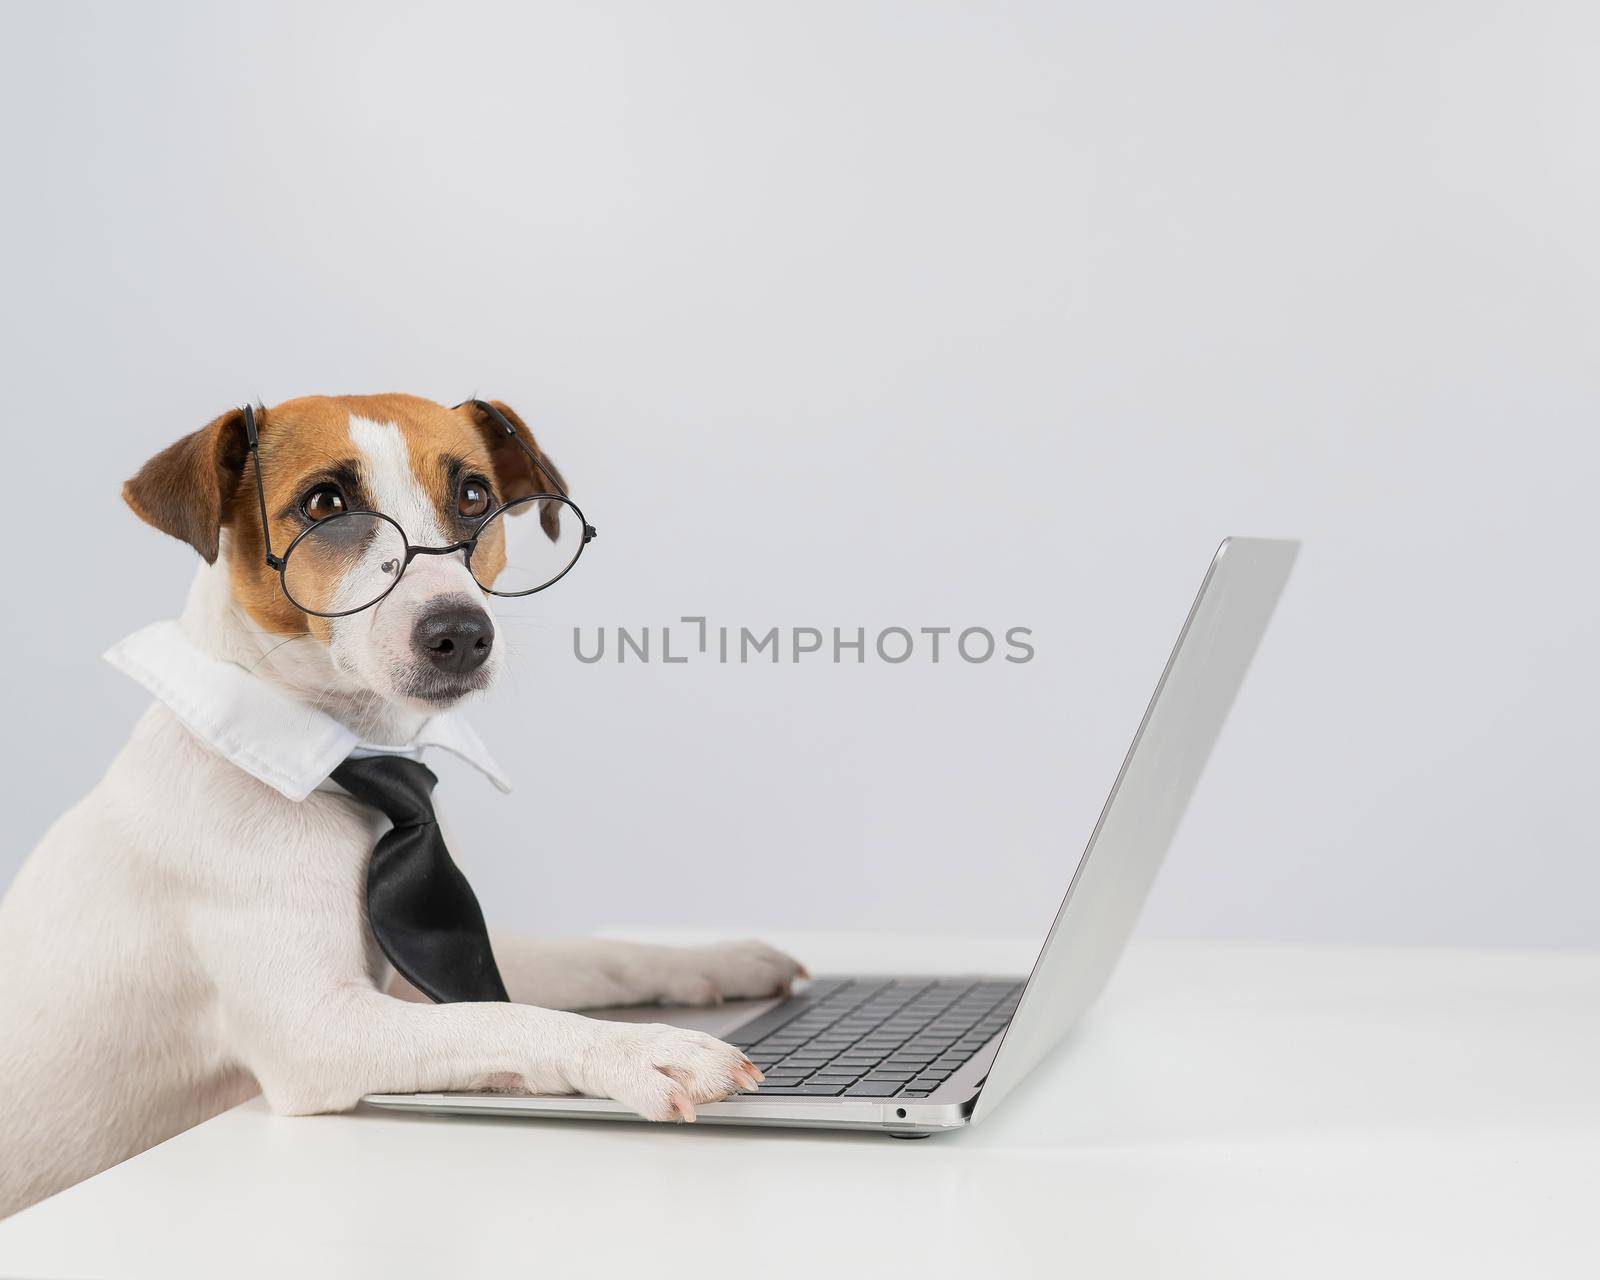 Jack russell terrier dog in glasses and tie works on laptop on white background. by mrwed54